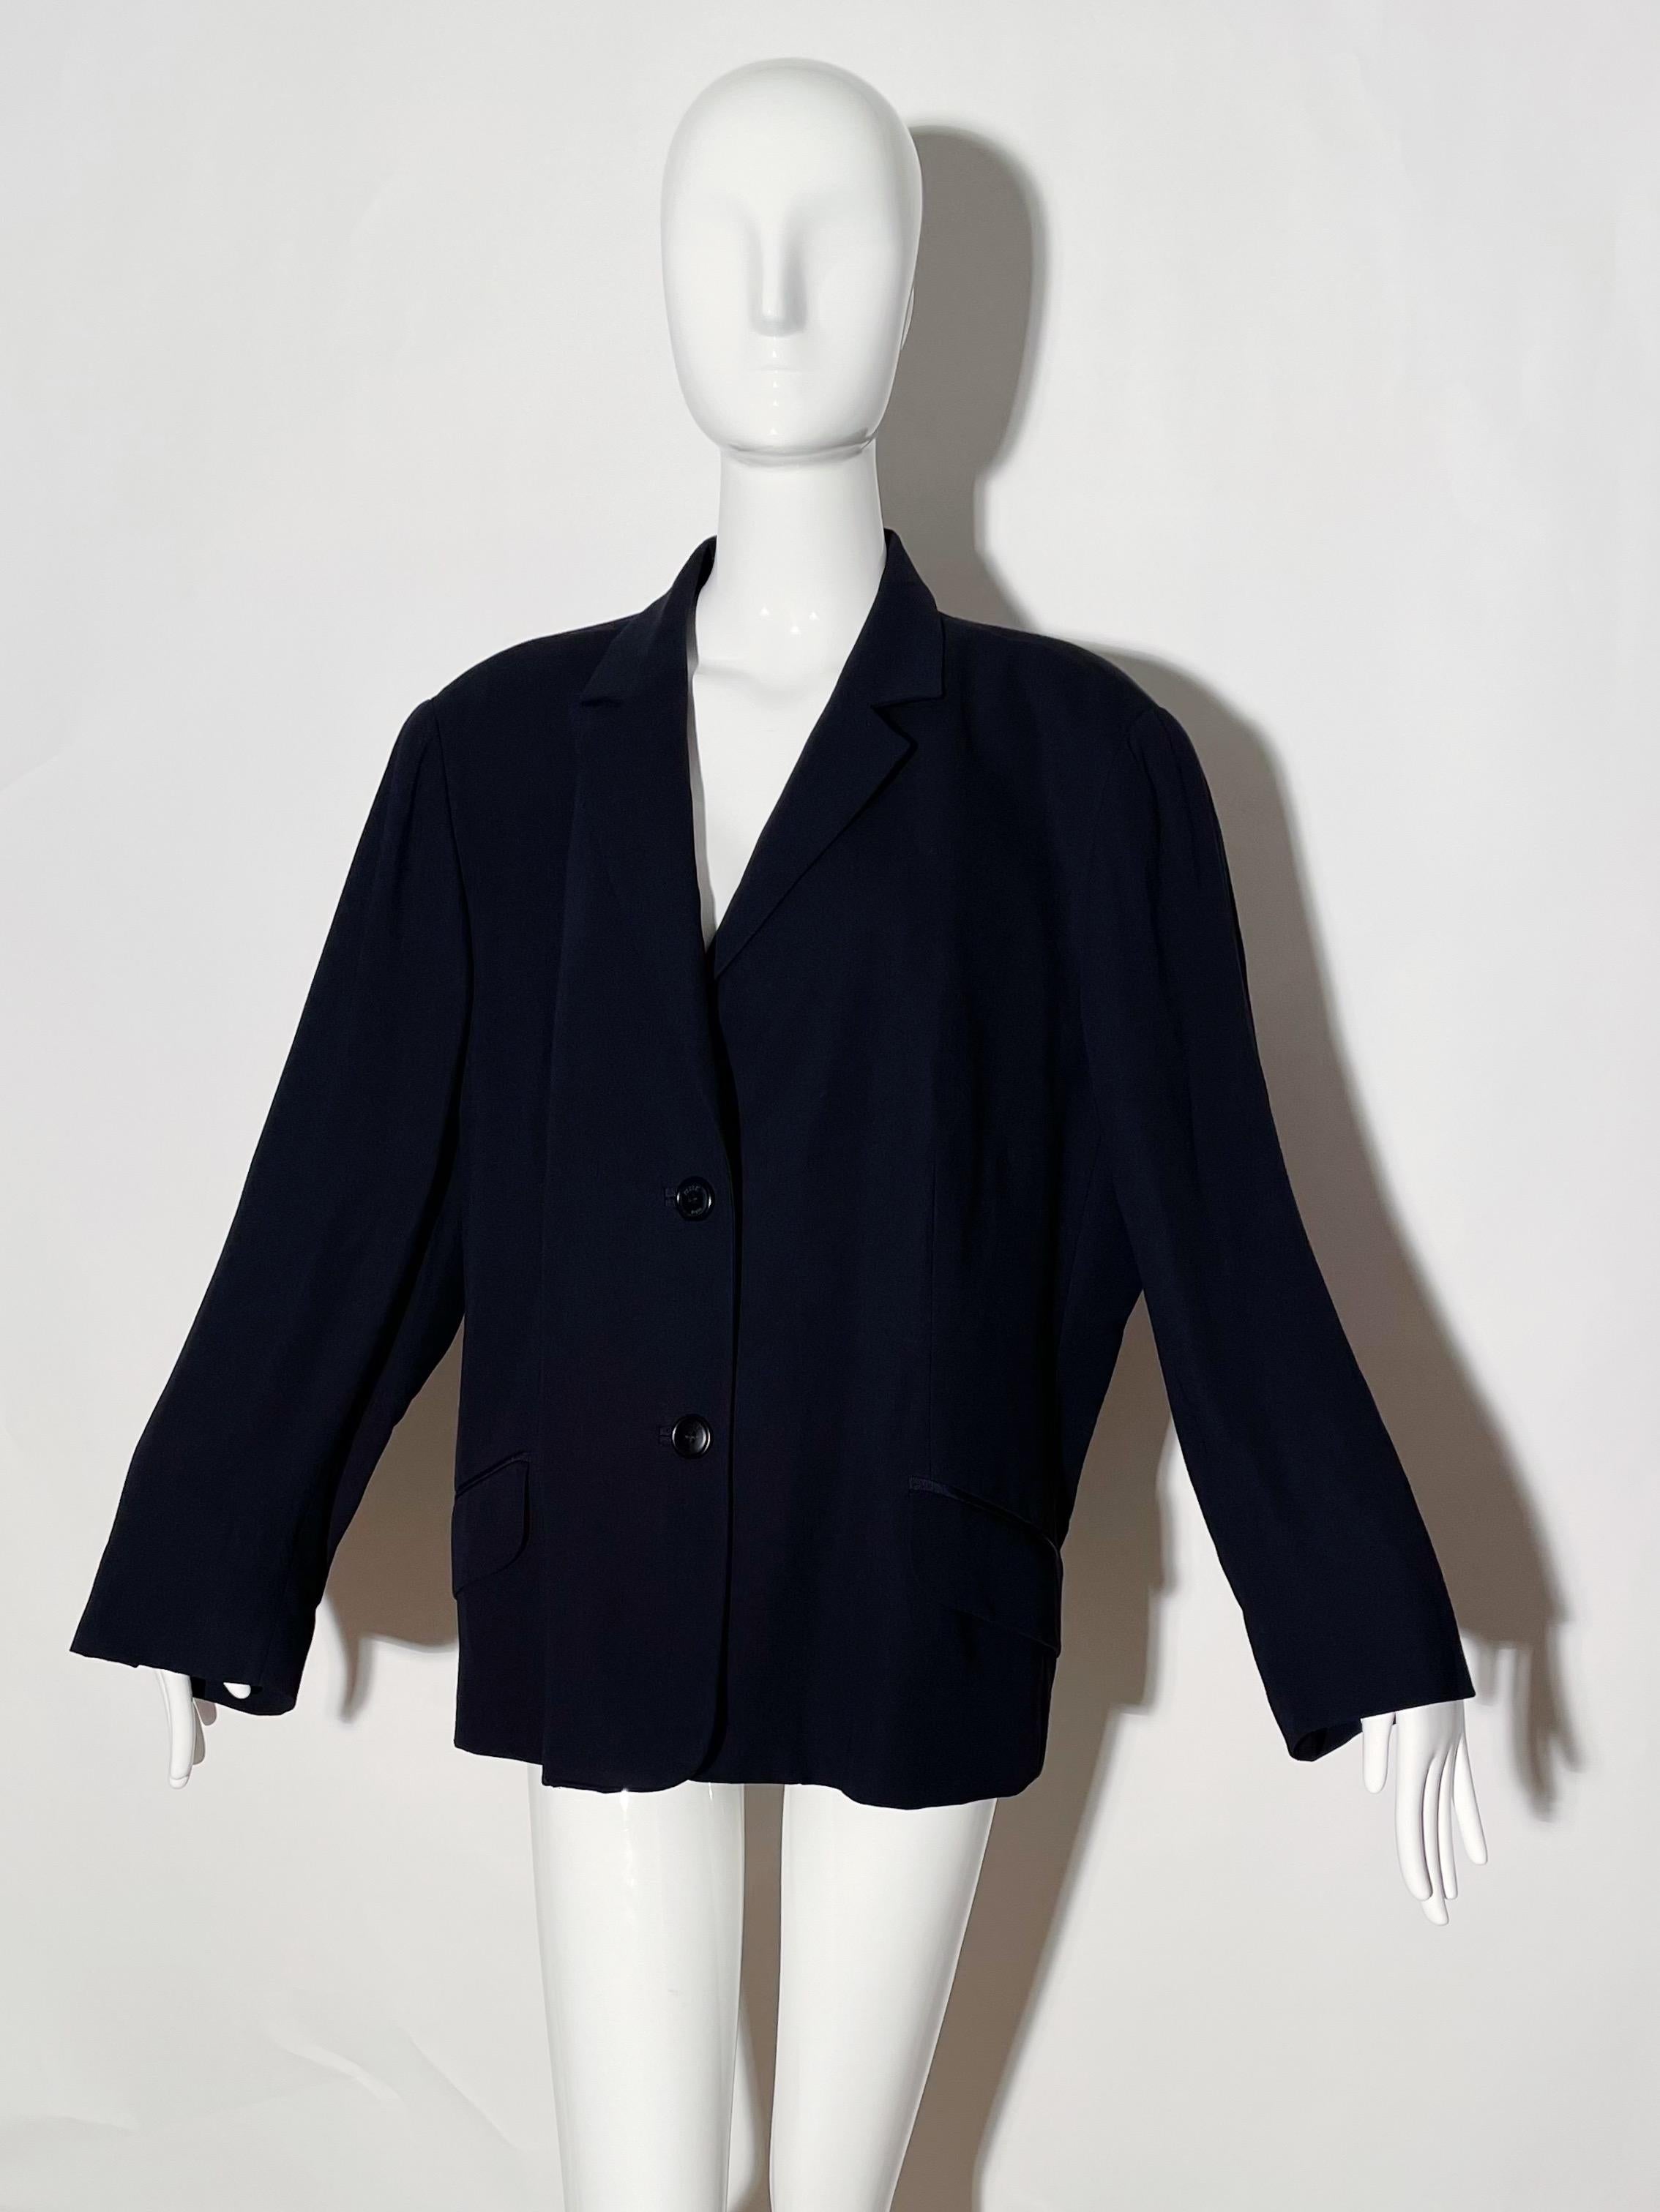 Navy blazer. Front buttons. Front pockets. Lapel. Lined. Shoulder pads. Wool and viscose blend. Made in Italy. 
*Condition: Excellent vintage condition. No visible Flaws.

Measurements Taken Laying Flat (inches)—
Shoulder to Shoulder: 18 in.
Sleeve